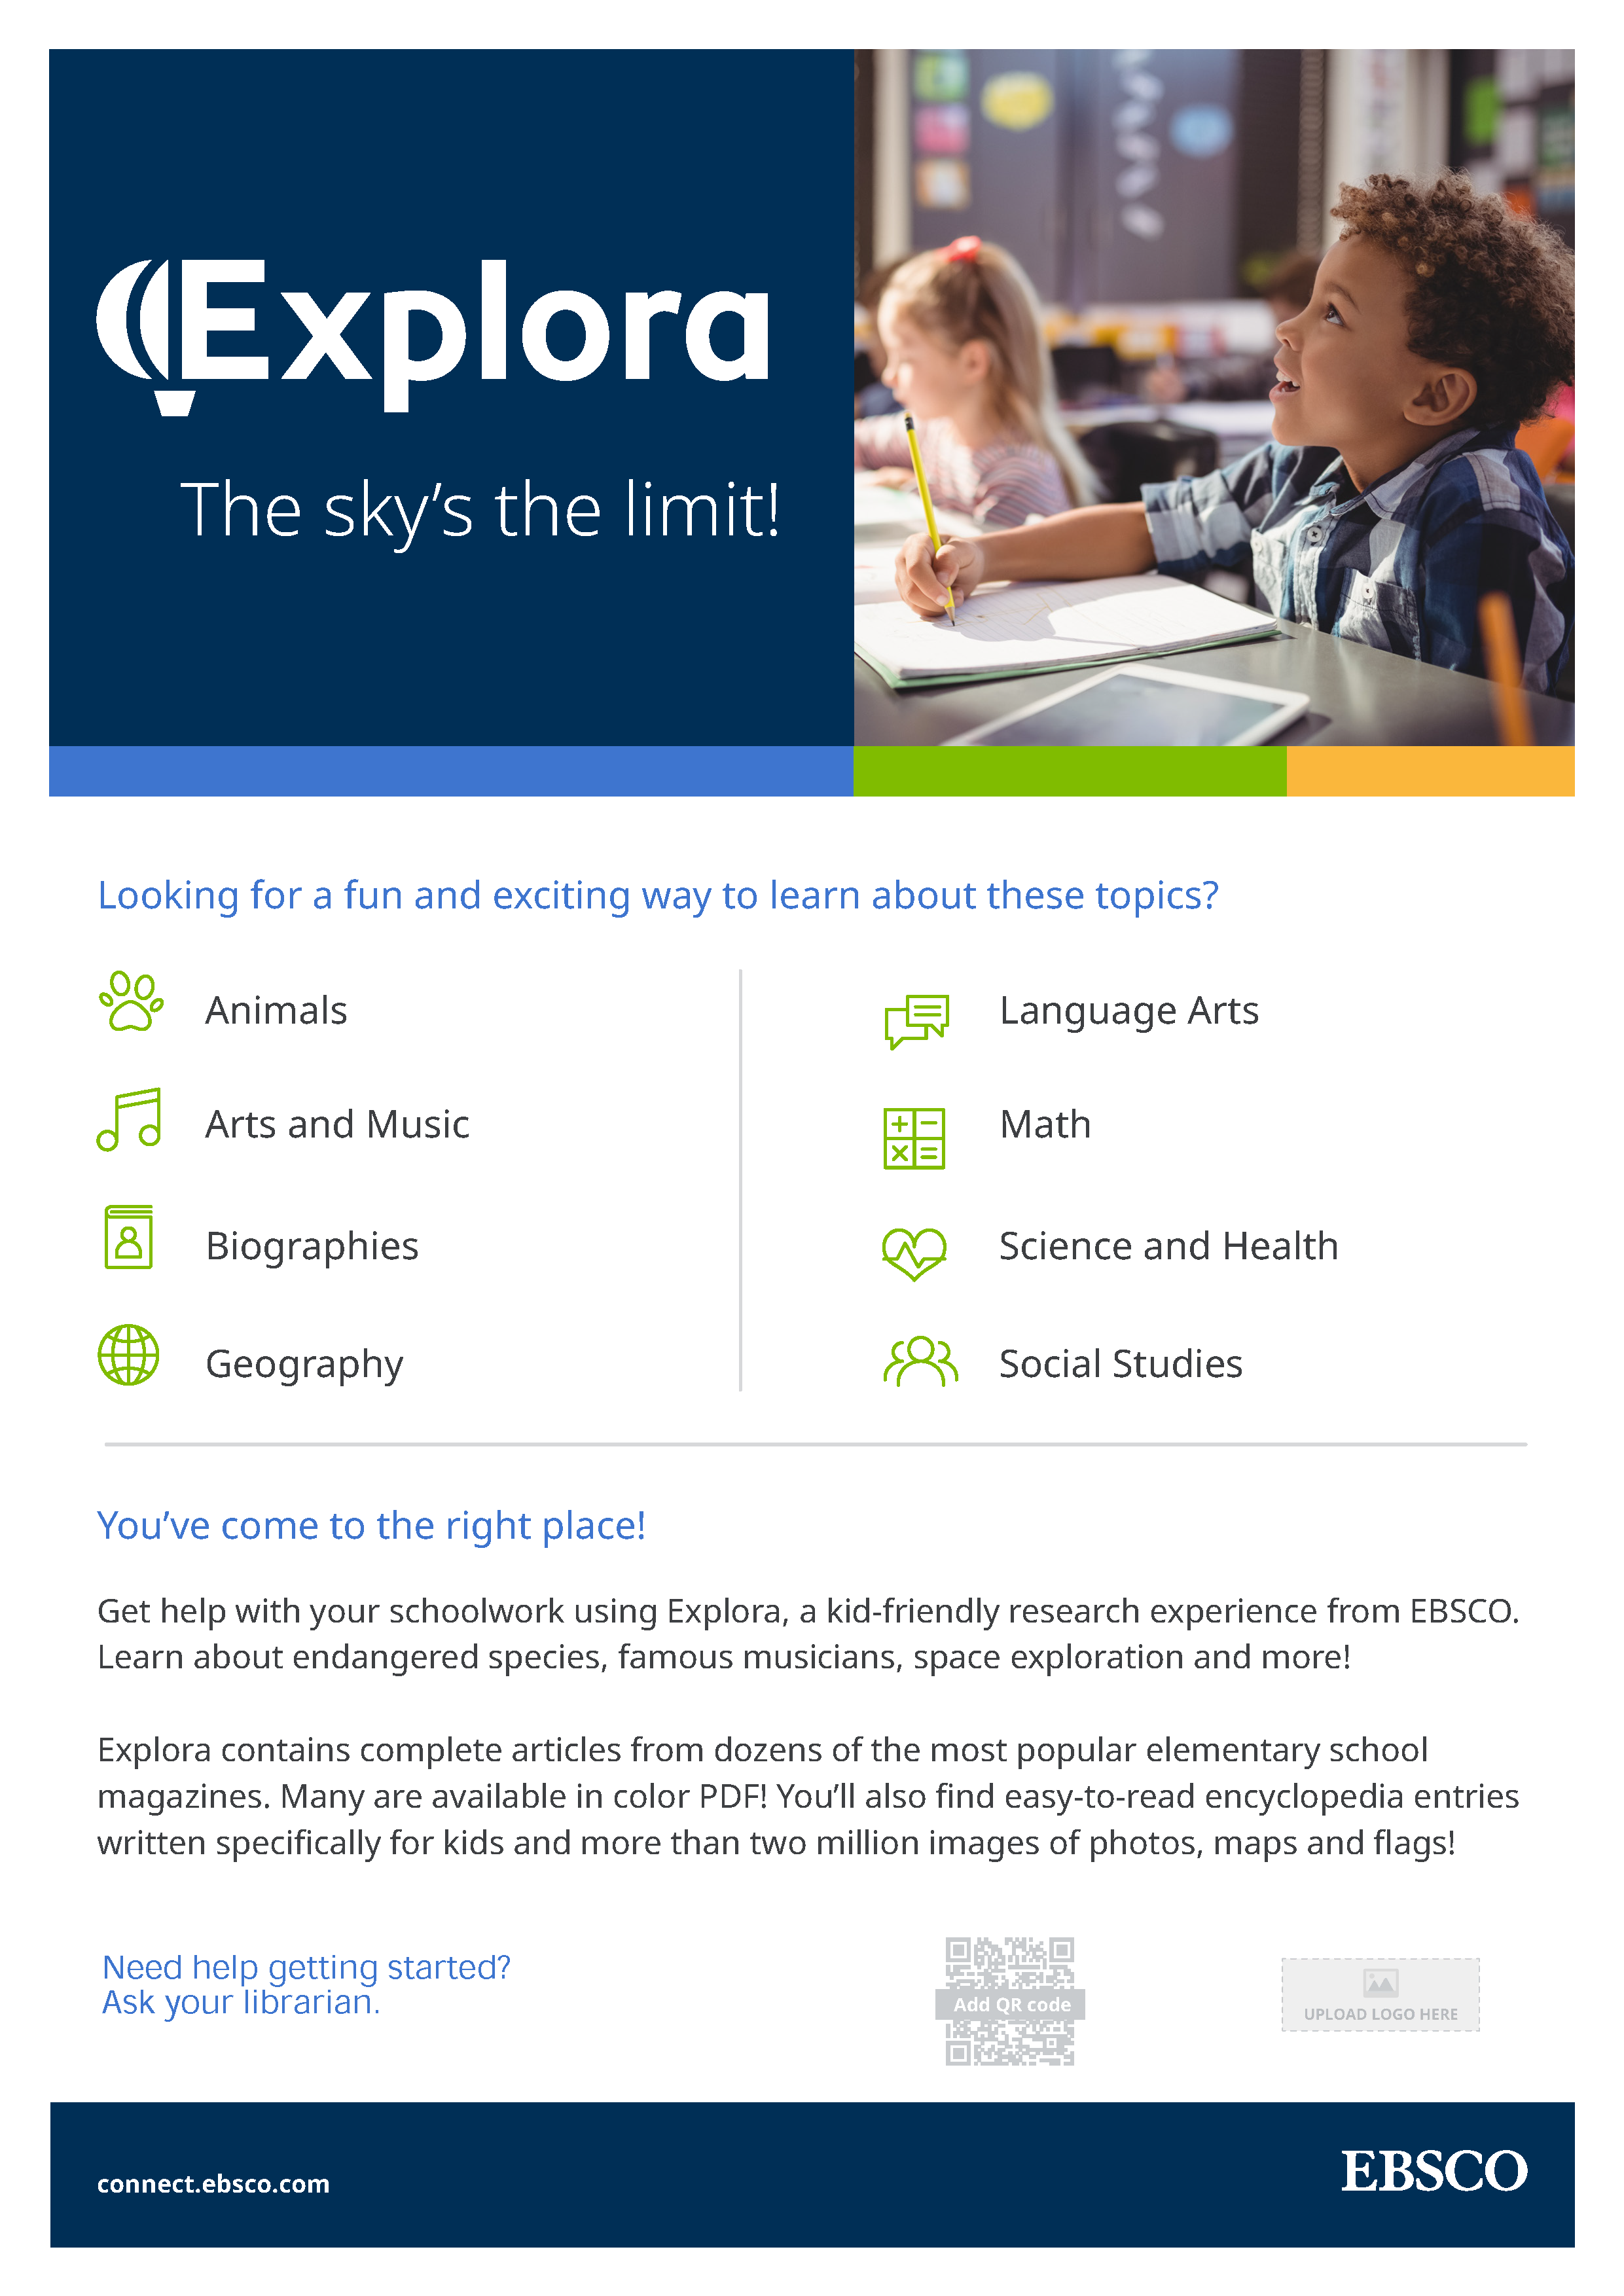 Information about Explora with a photo of two children in a classroom in the top right corner.